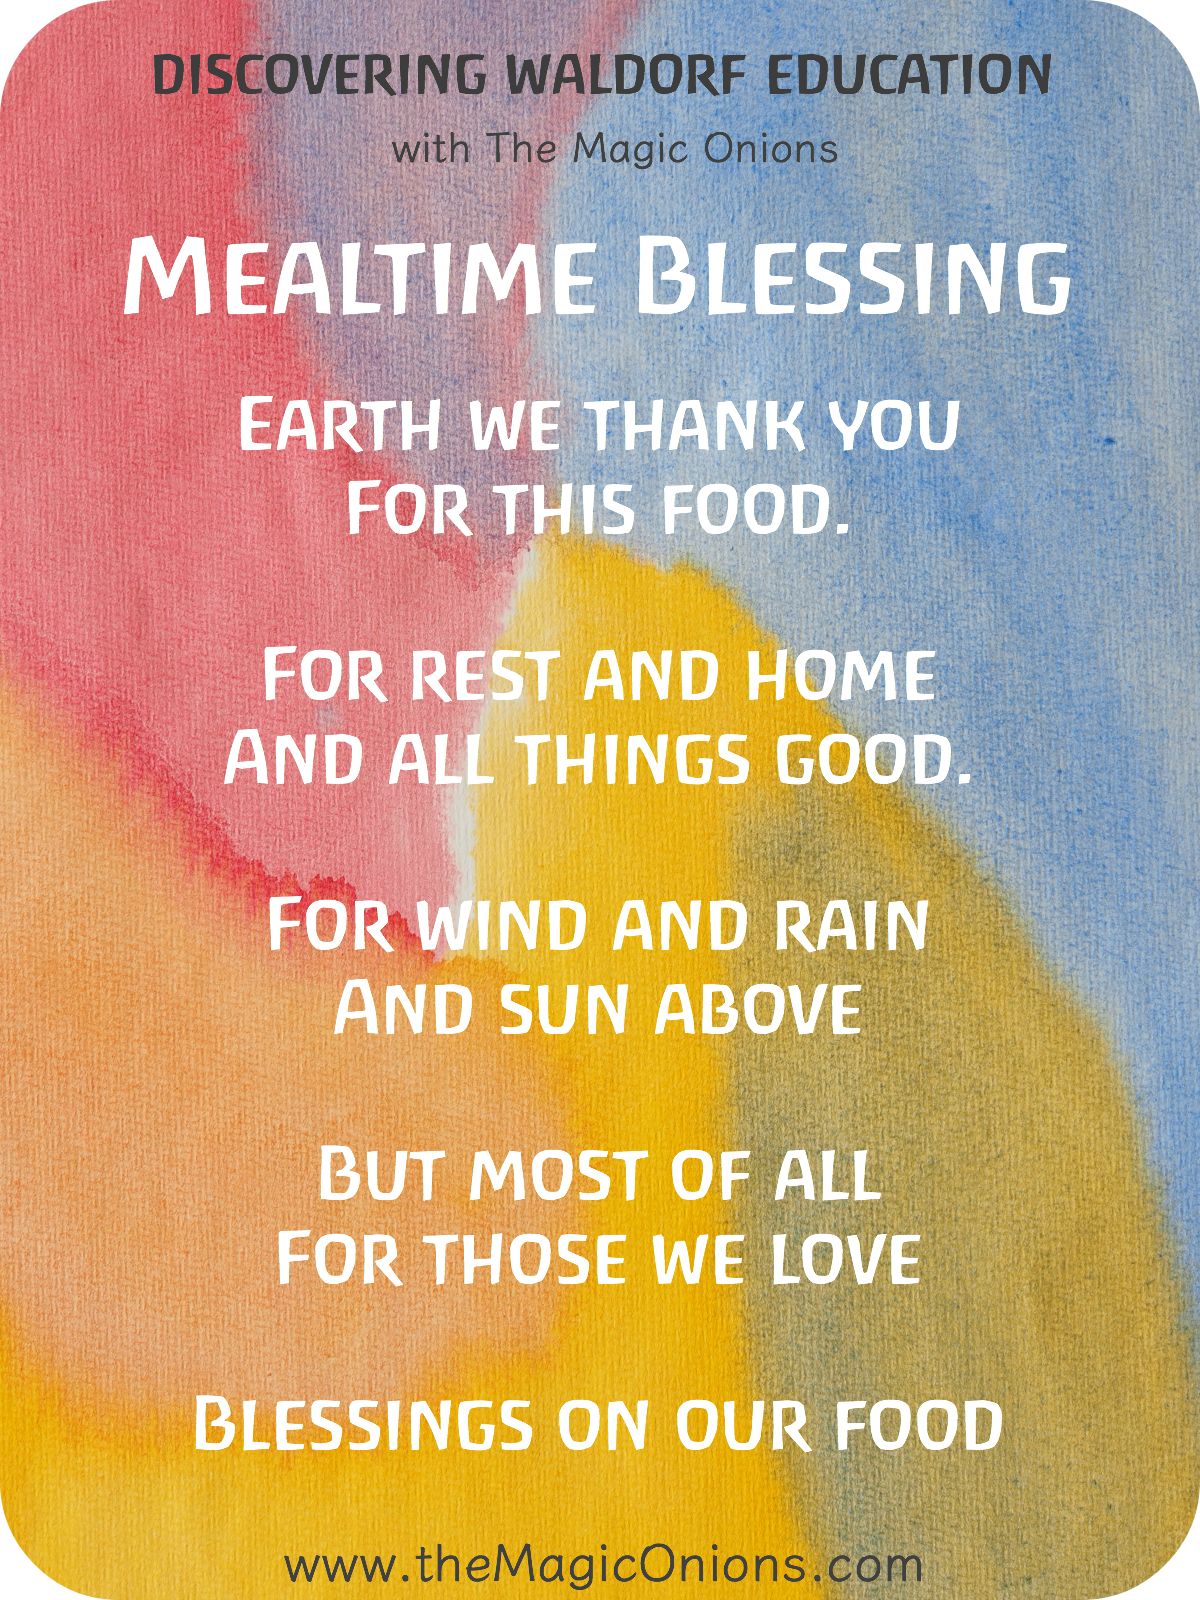 Beautiful Waldorf Meal Blessing Verse for Food - Earth we thank you for this food, for rest and home and all things good